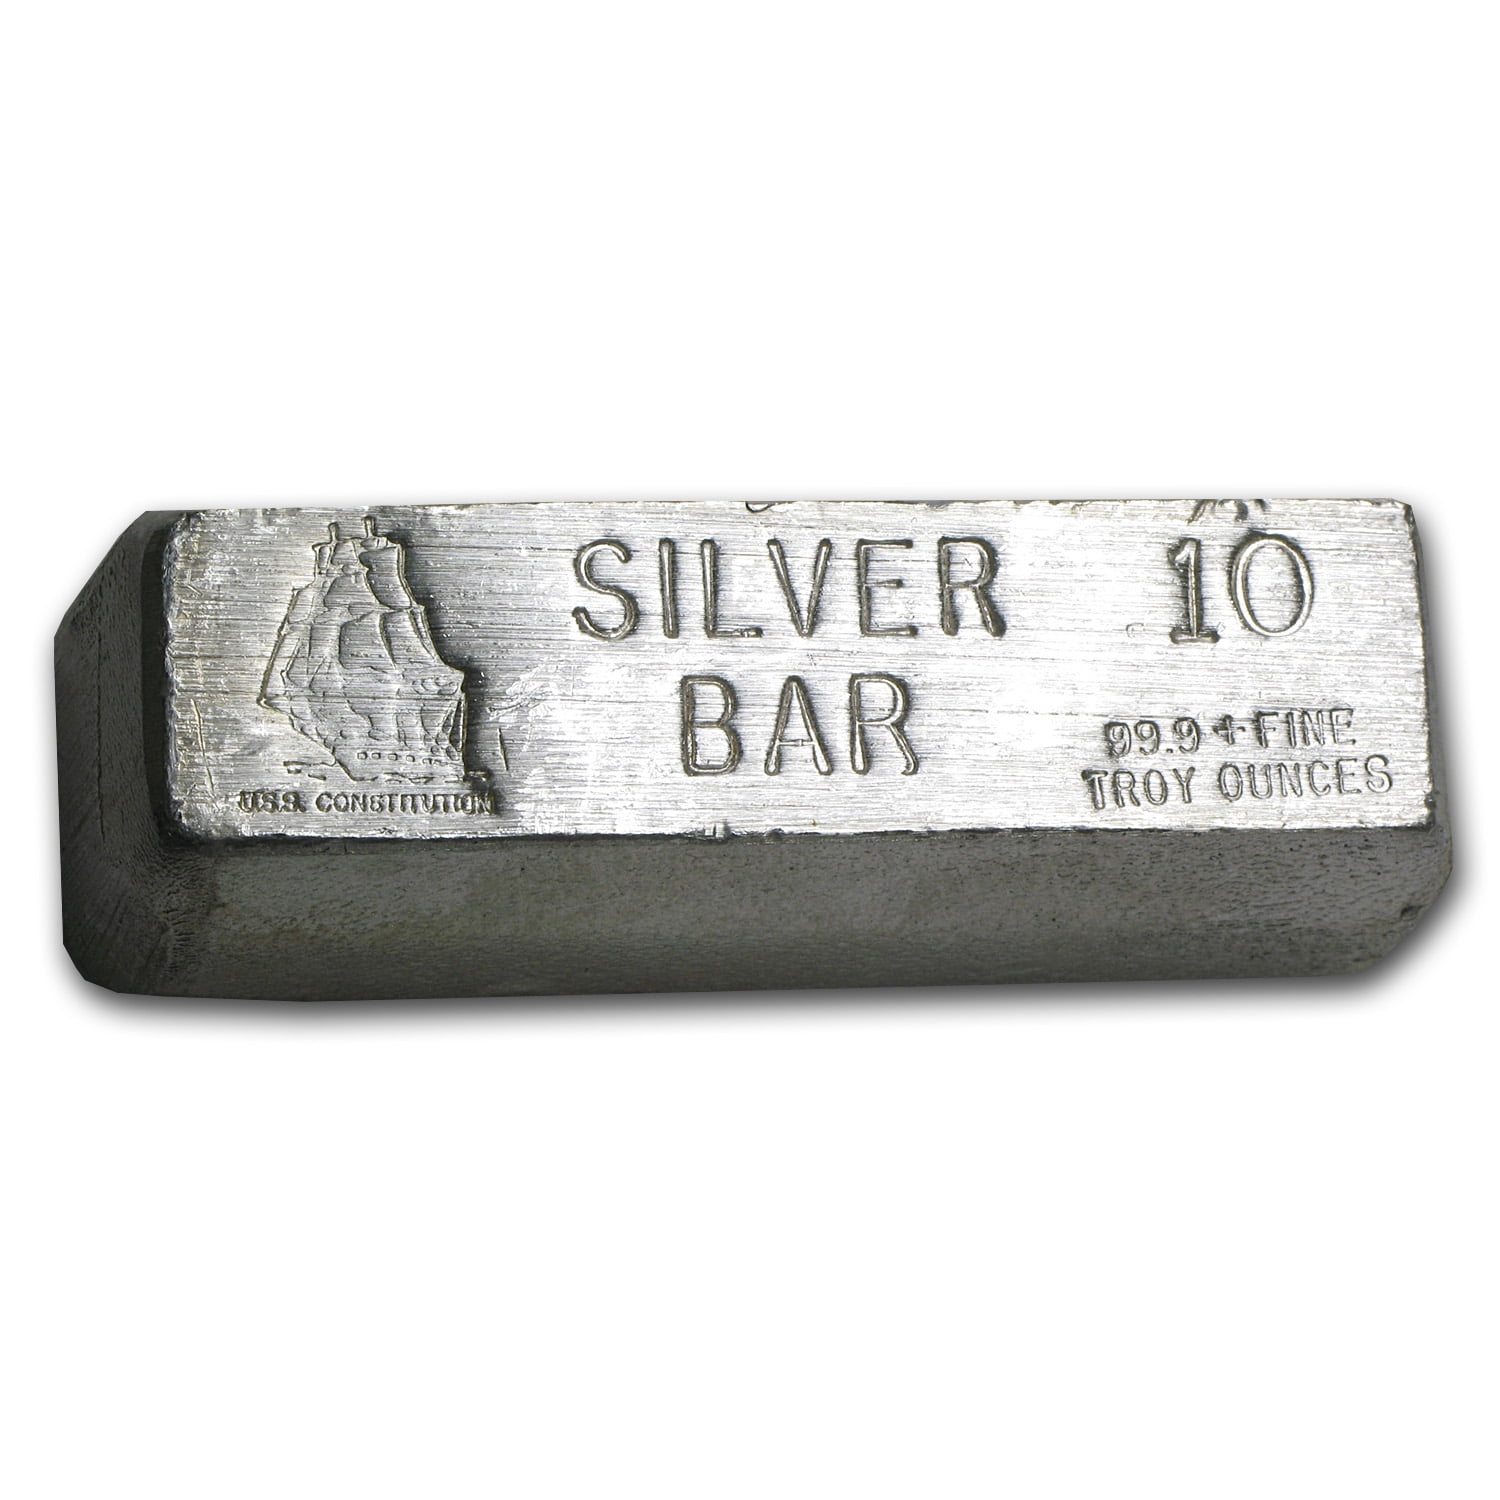 Tubes for 10 oz Silver Bars (Rectangles)